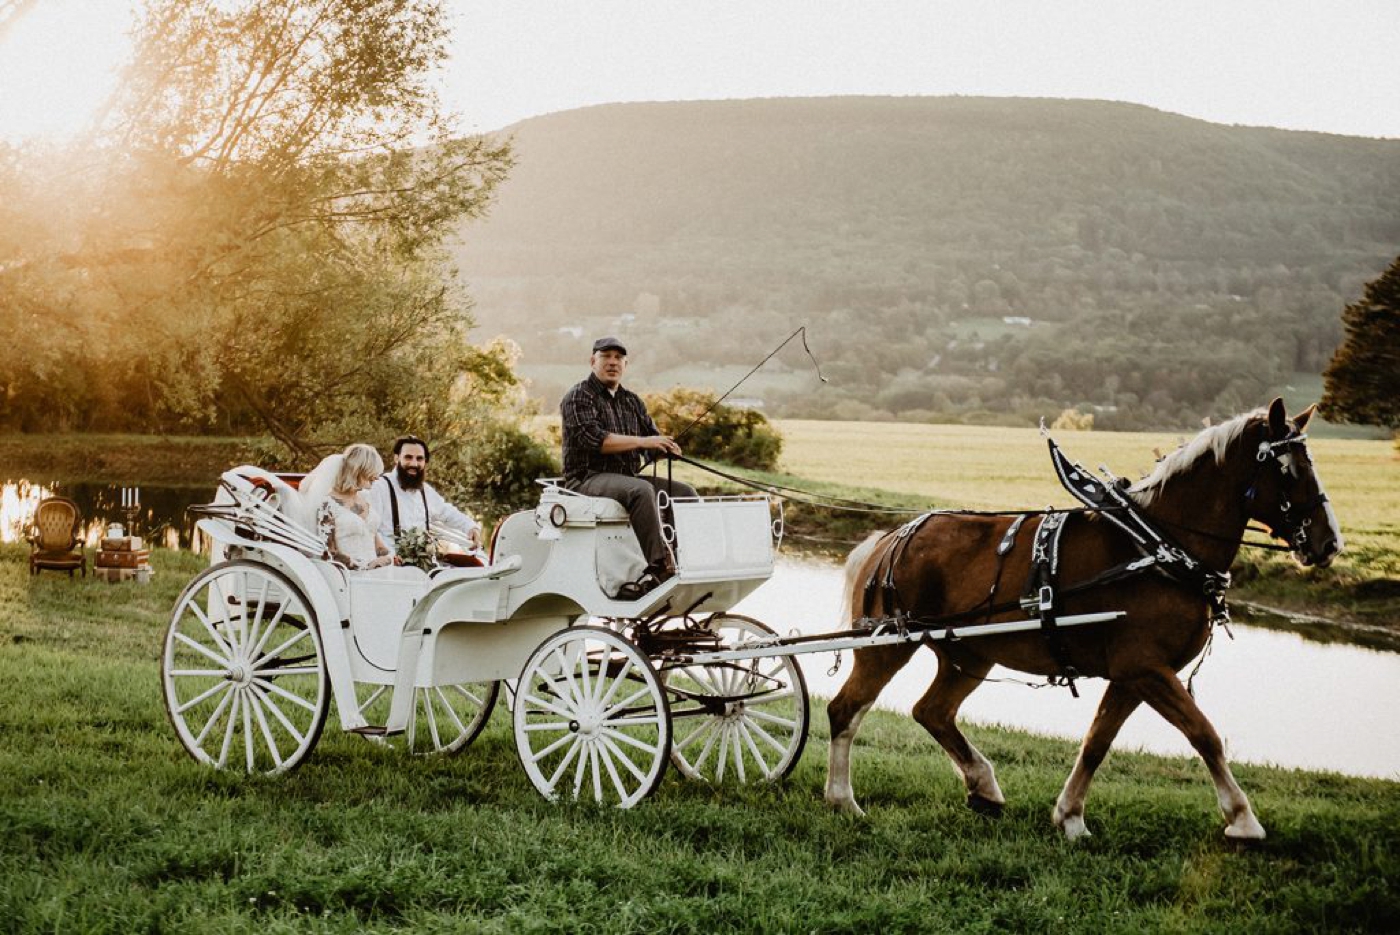 The 10 Most Intriguing Wedding Venues in Upstate New York 2020 | The Sablewood | Verve Event Co.